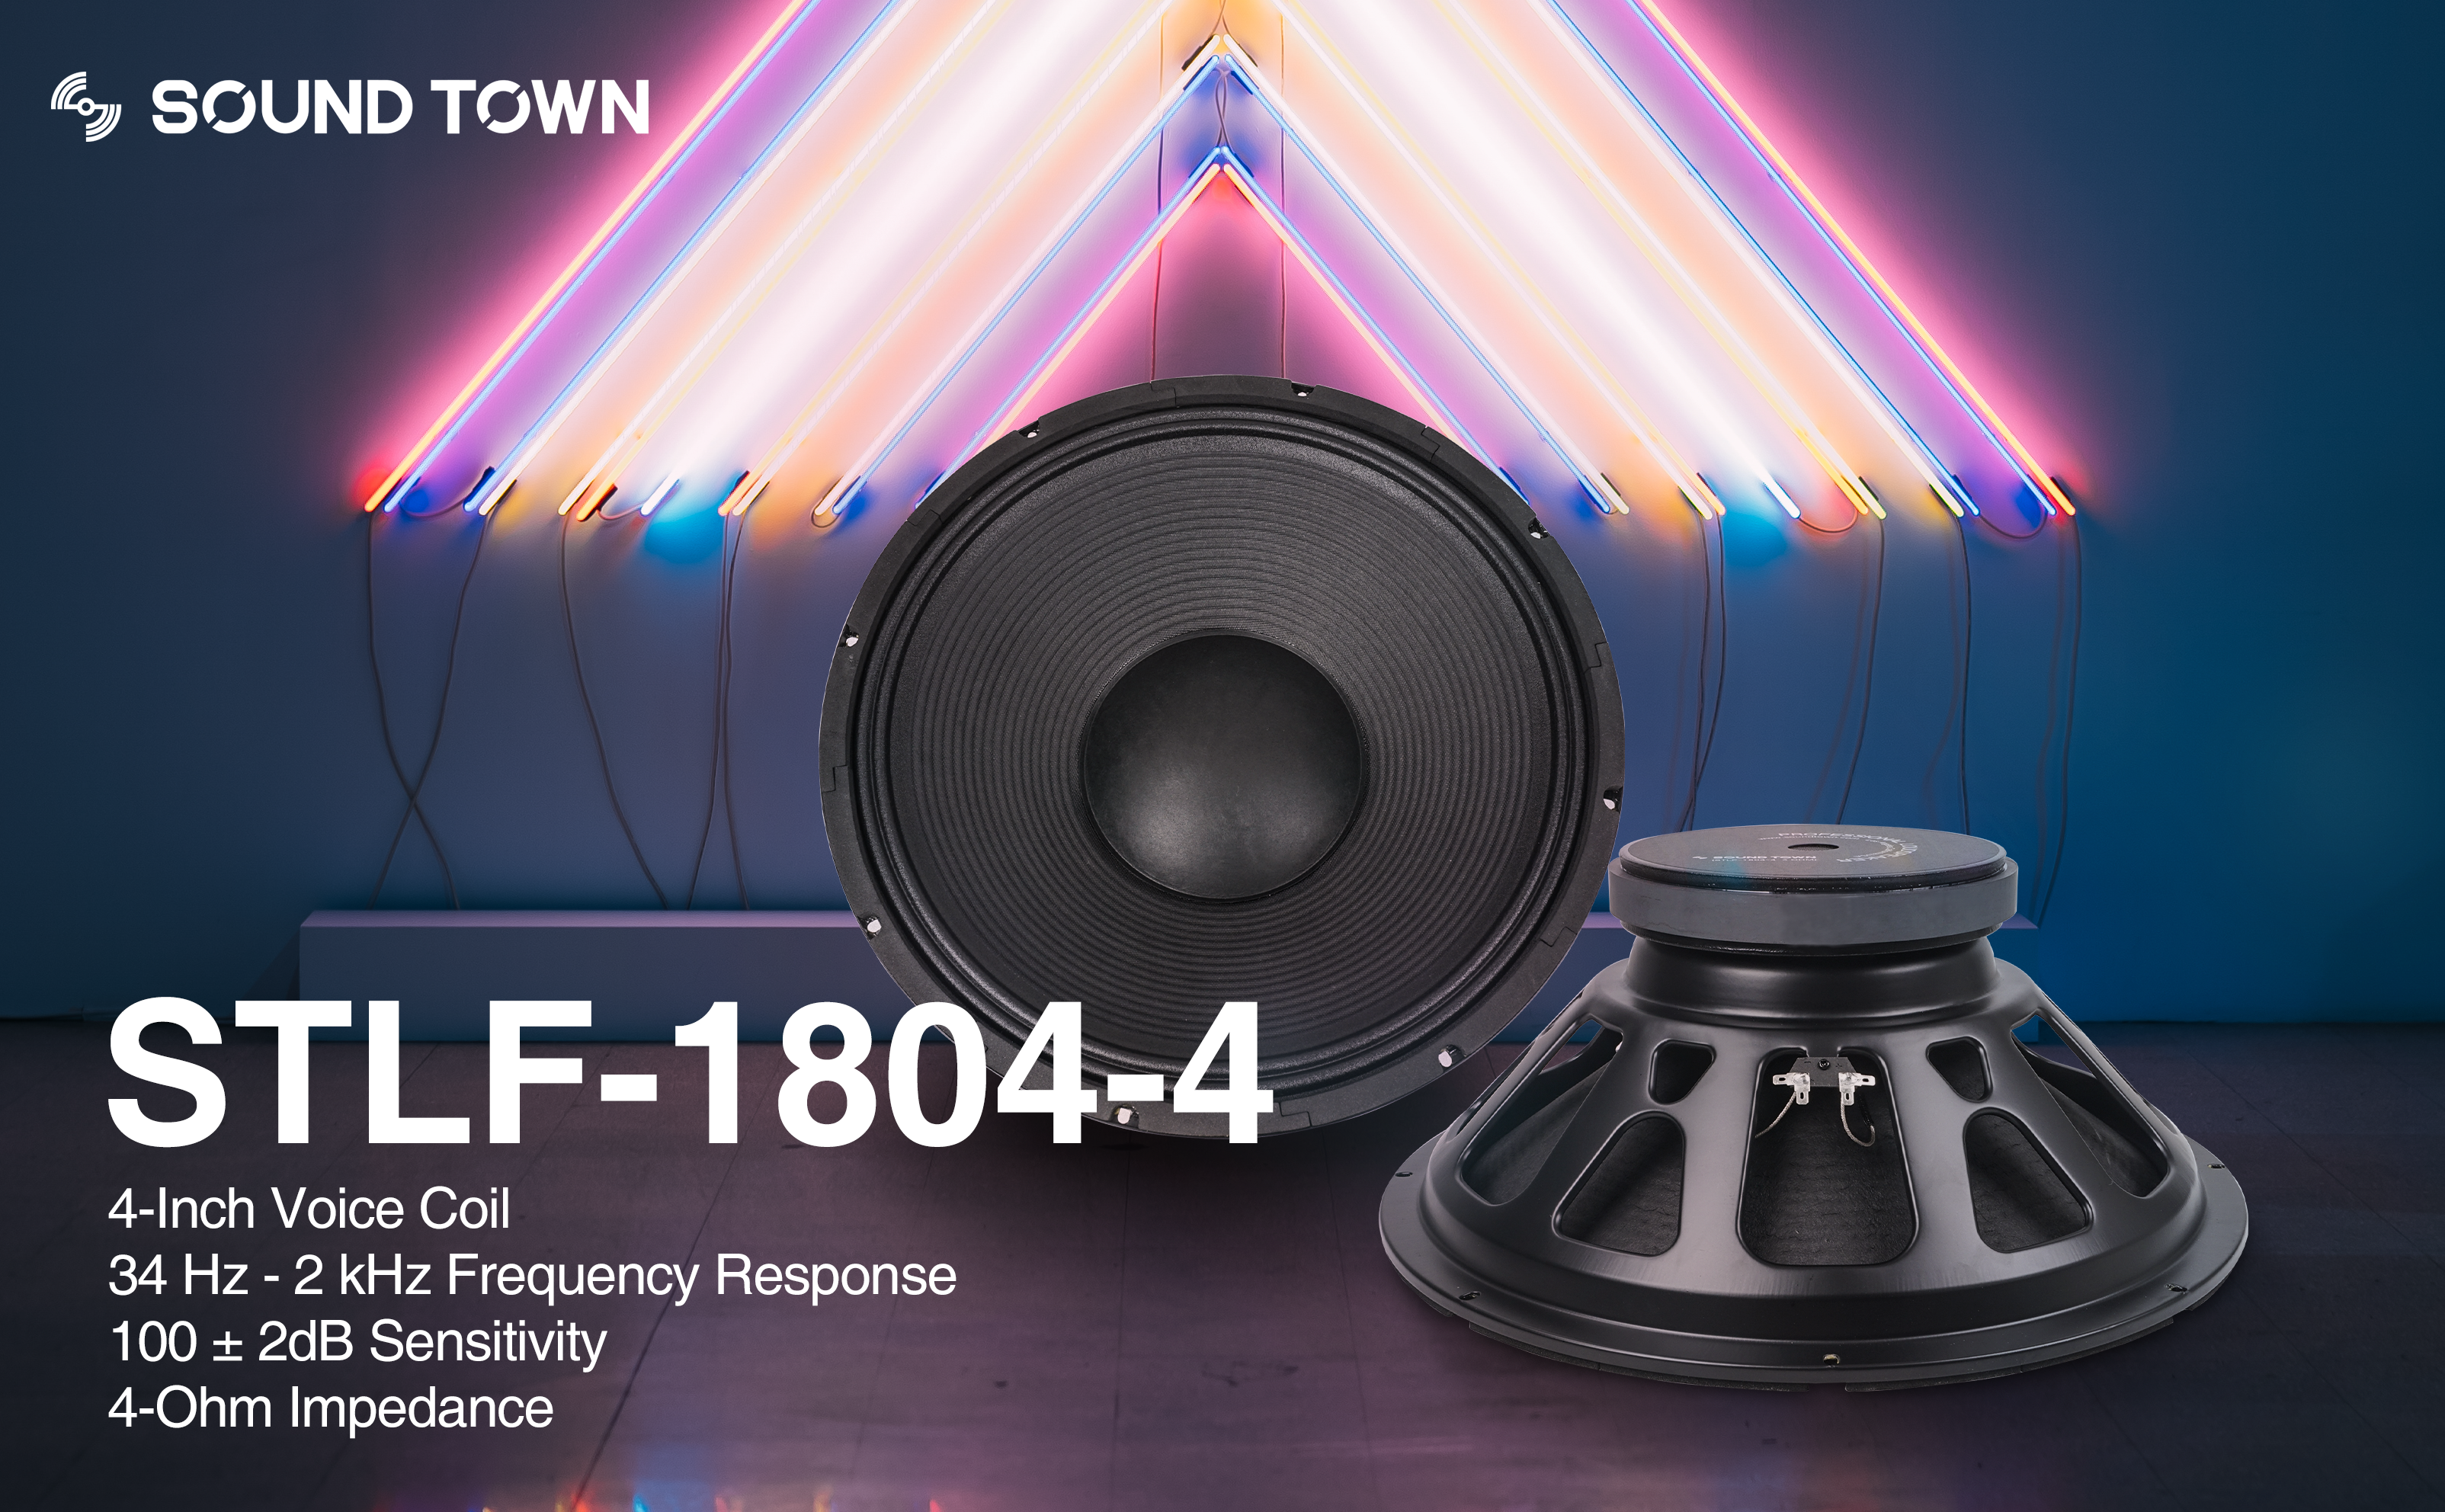 Sound Town STLF-1804-4 18" 450W Raw Woofer Speaker with 4" Voice Coil, 100 oz Magnet, Replacement for PA/DJ Subwoofer, 4-ohm - SPECIFICATIONS